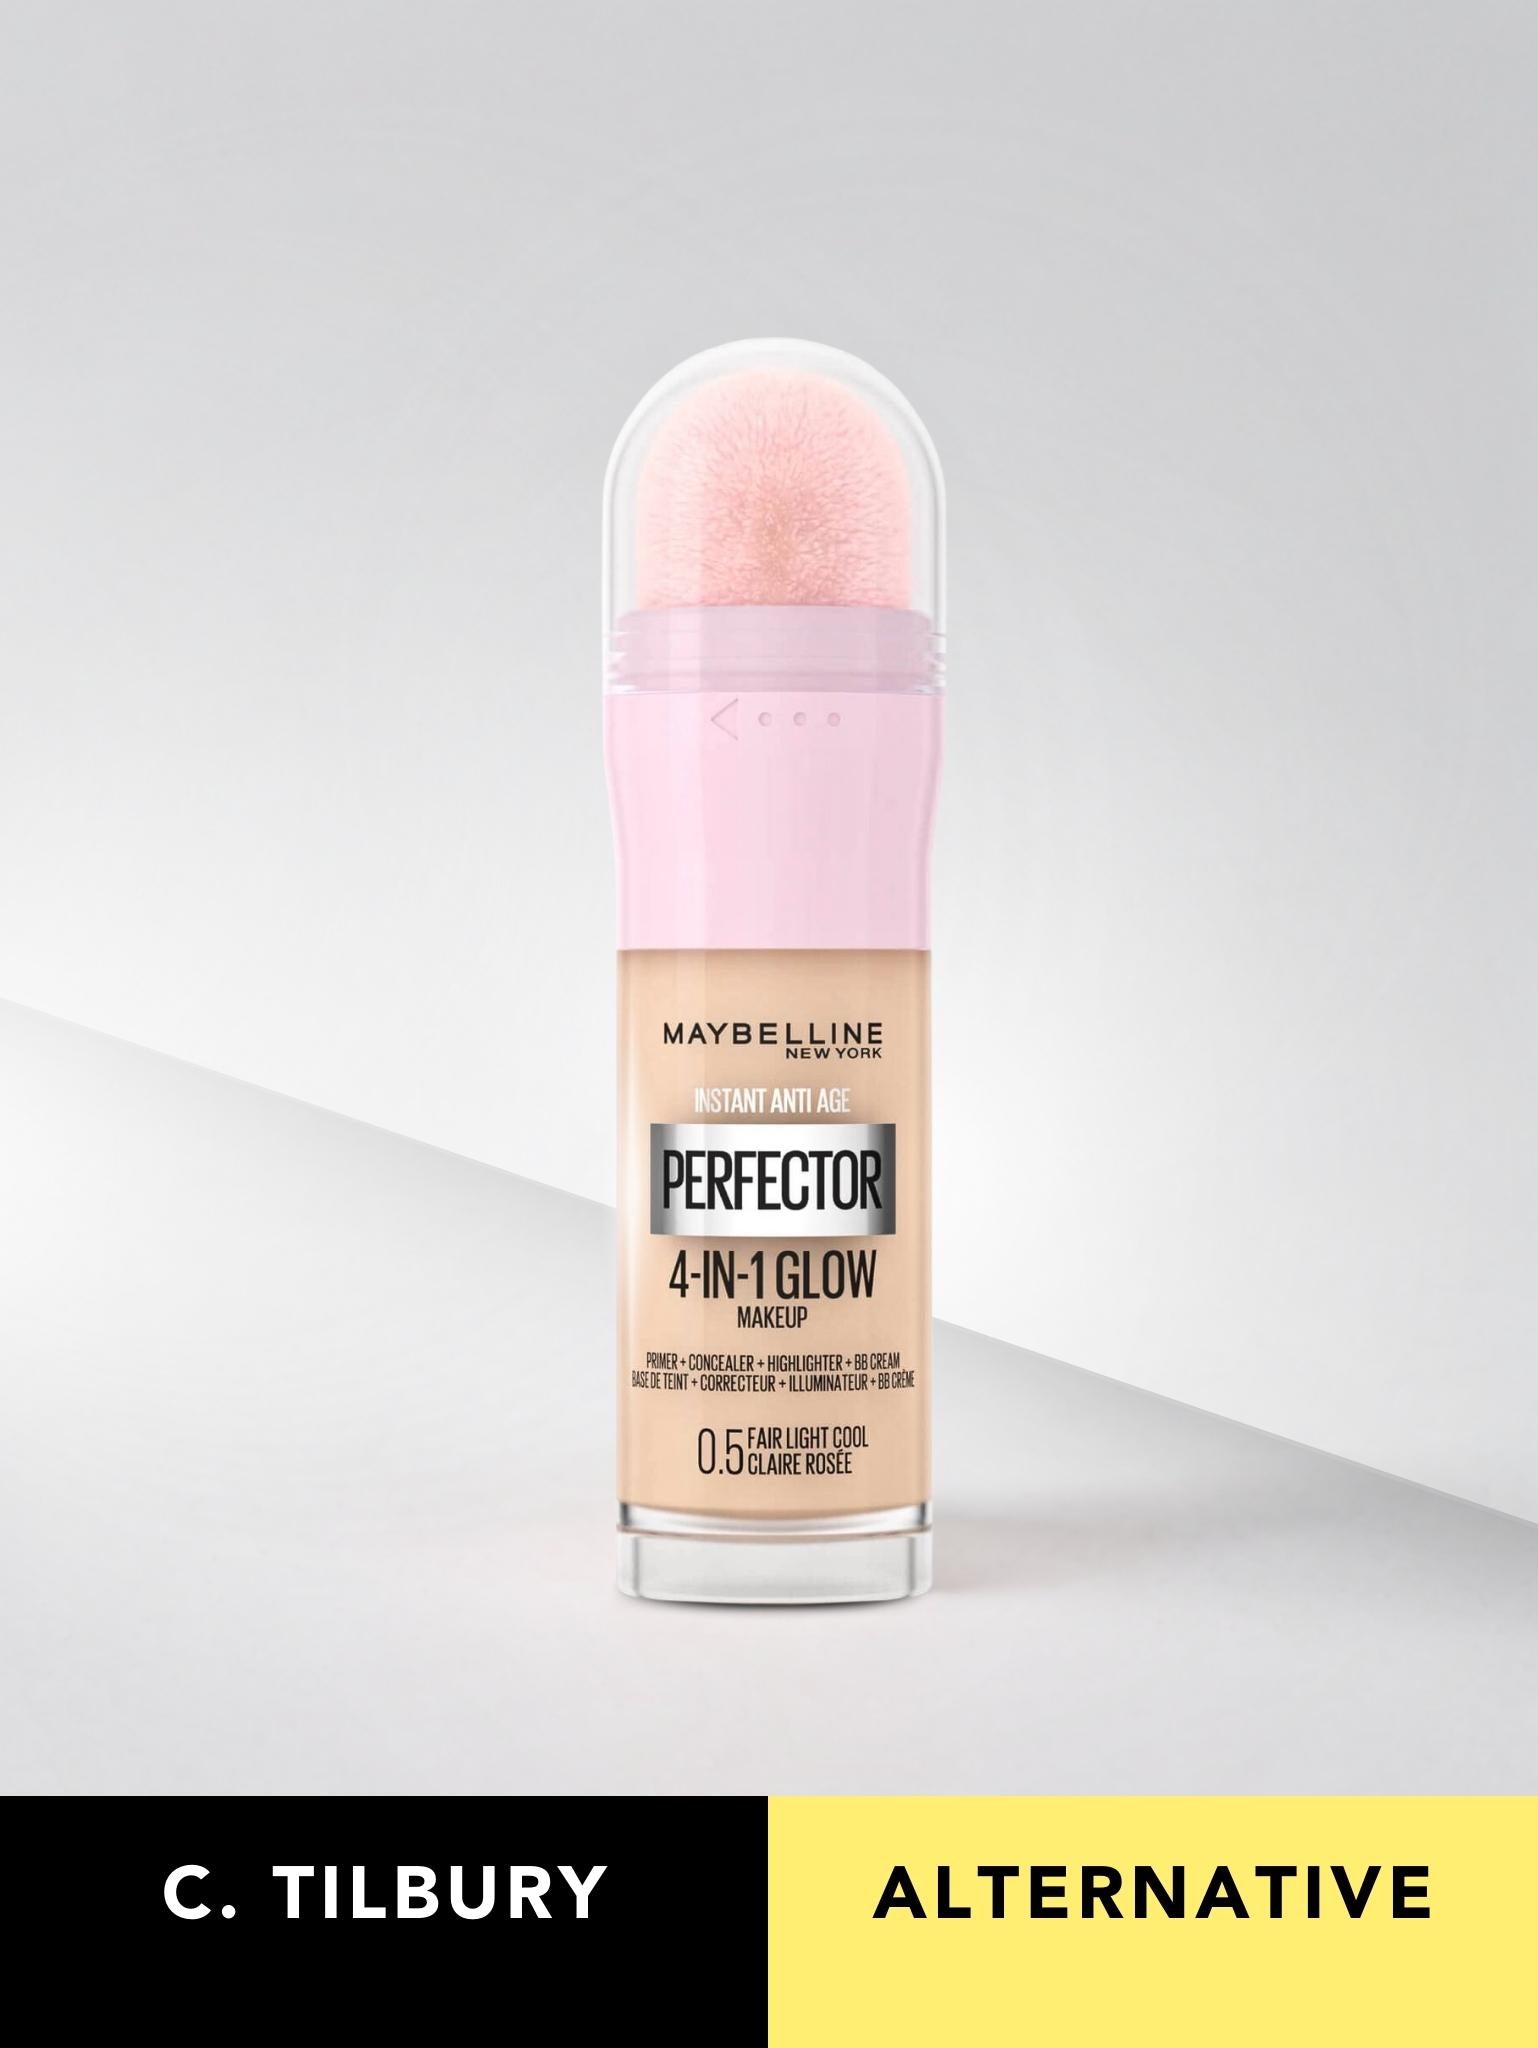 Maybelline Instant Age Rewind Perfector 4-in-1: Fair Light Cool